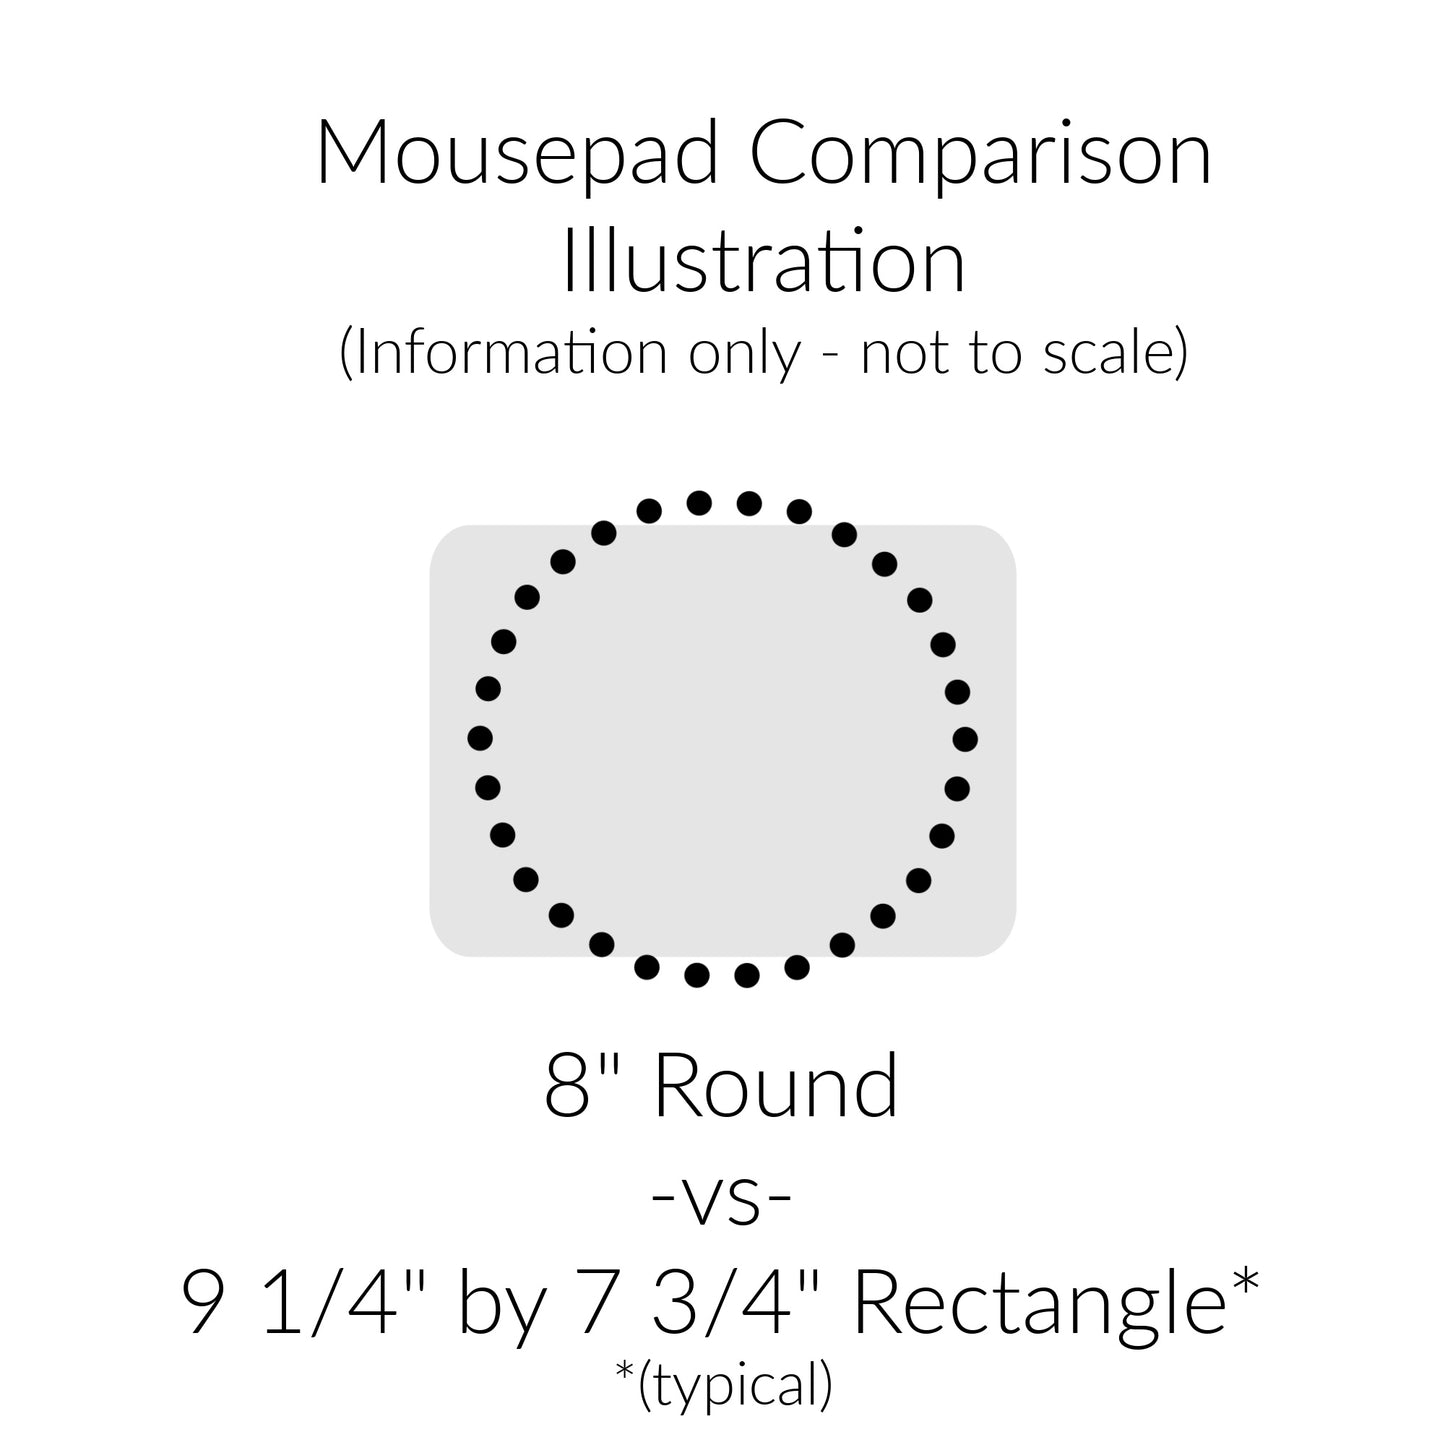 An illustration of how this round mouse pad compares to another which is rectangular in shape